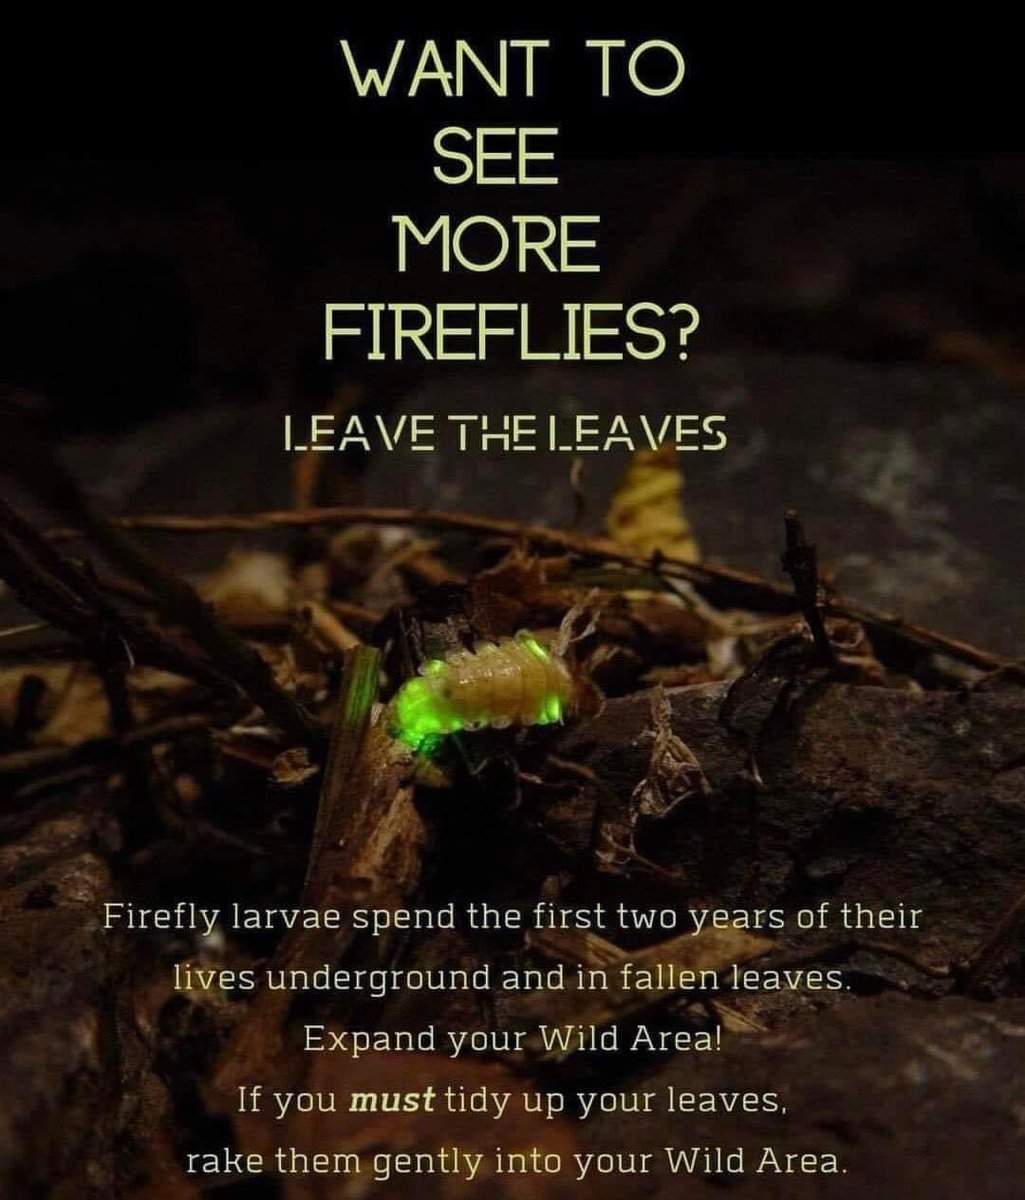 Please #leavetheleaves for #fireflies and other important critters!